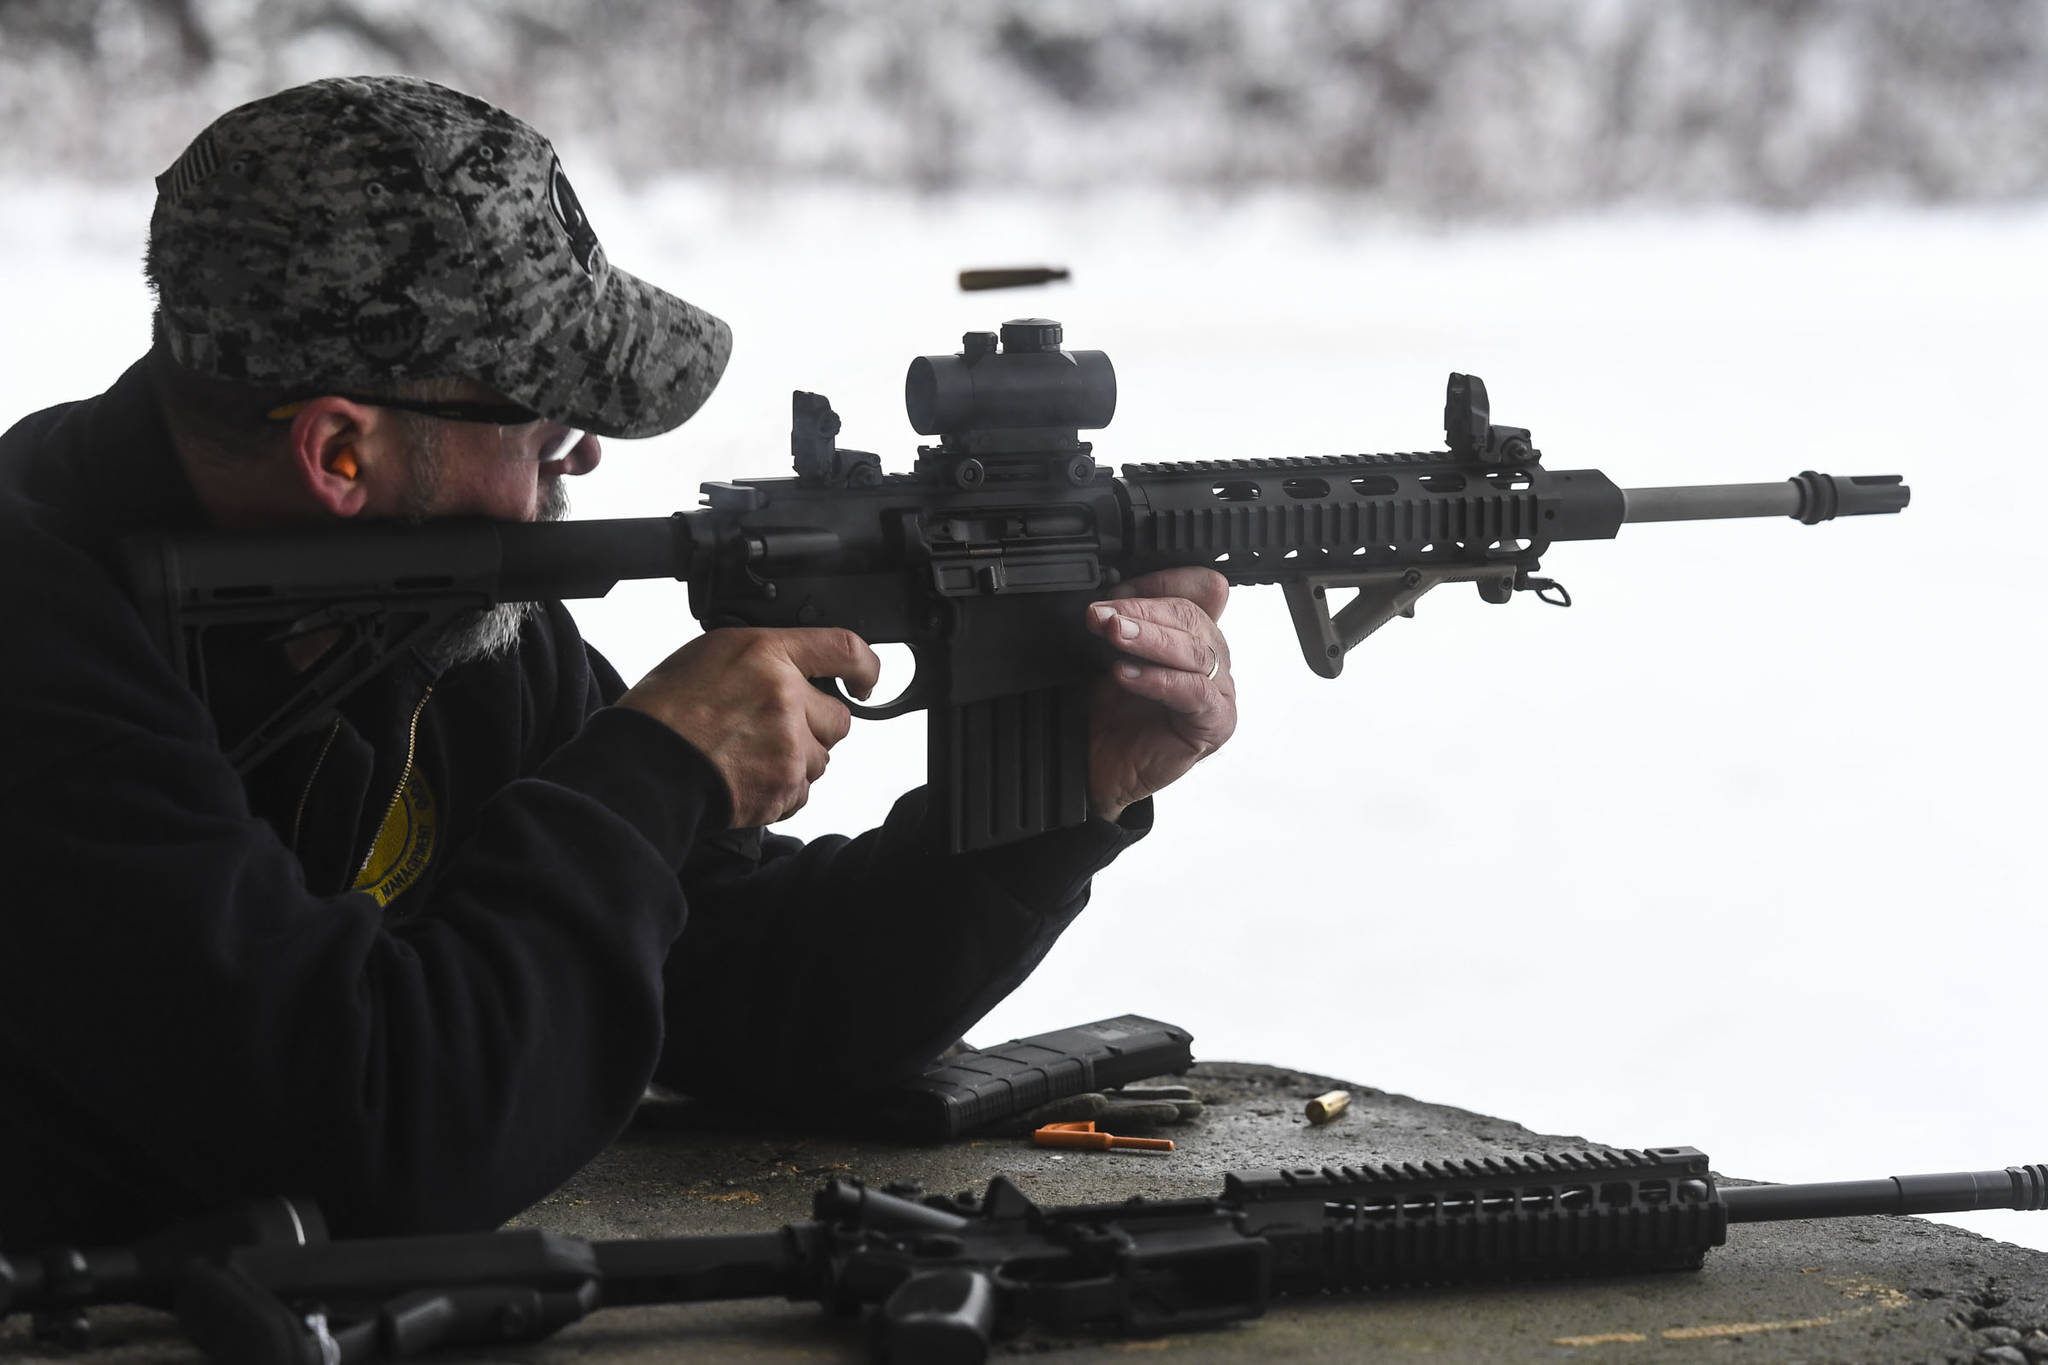 A spent shell flies as Tim Storbeck Sr. takes target practice at the Hank Harmon Rifle Range on Montana Creek Road on Wednesday, Dec. 18, 2019. (Michael Penn | Juneau Empire)